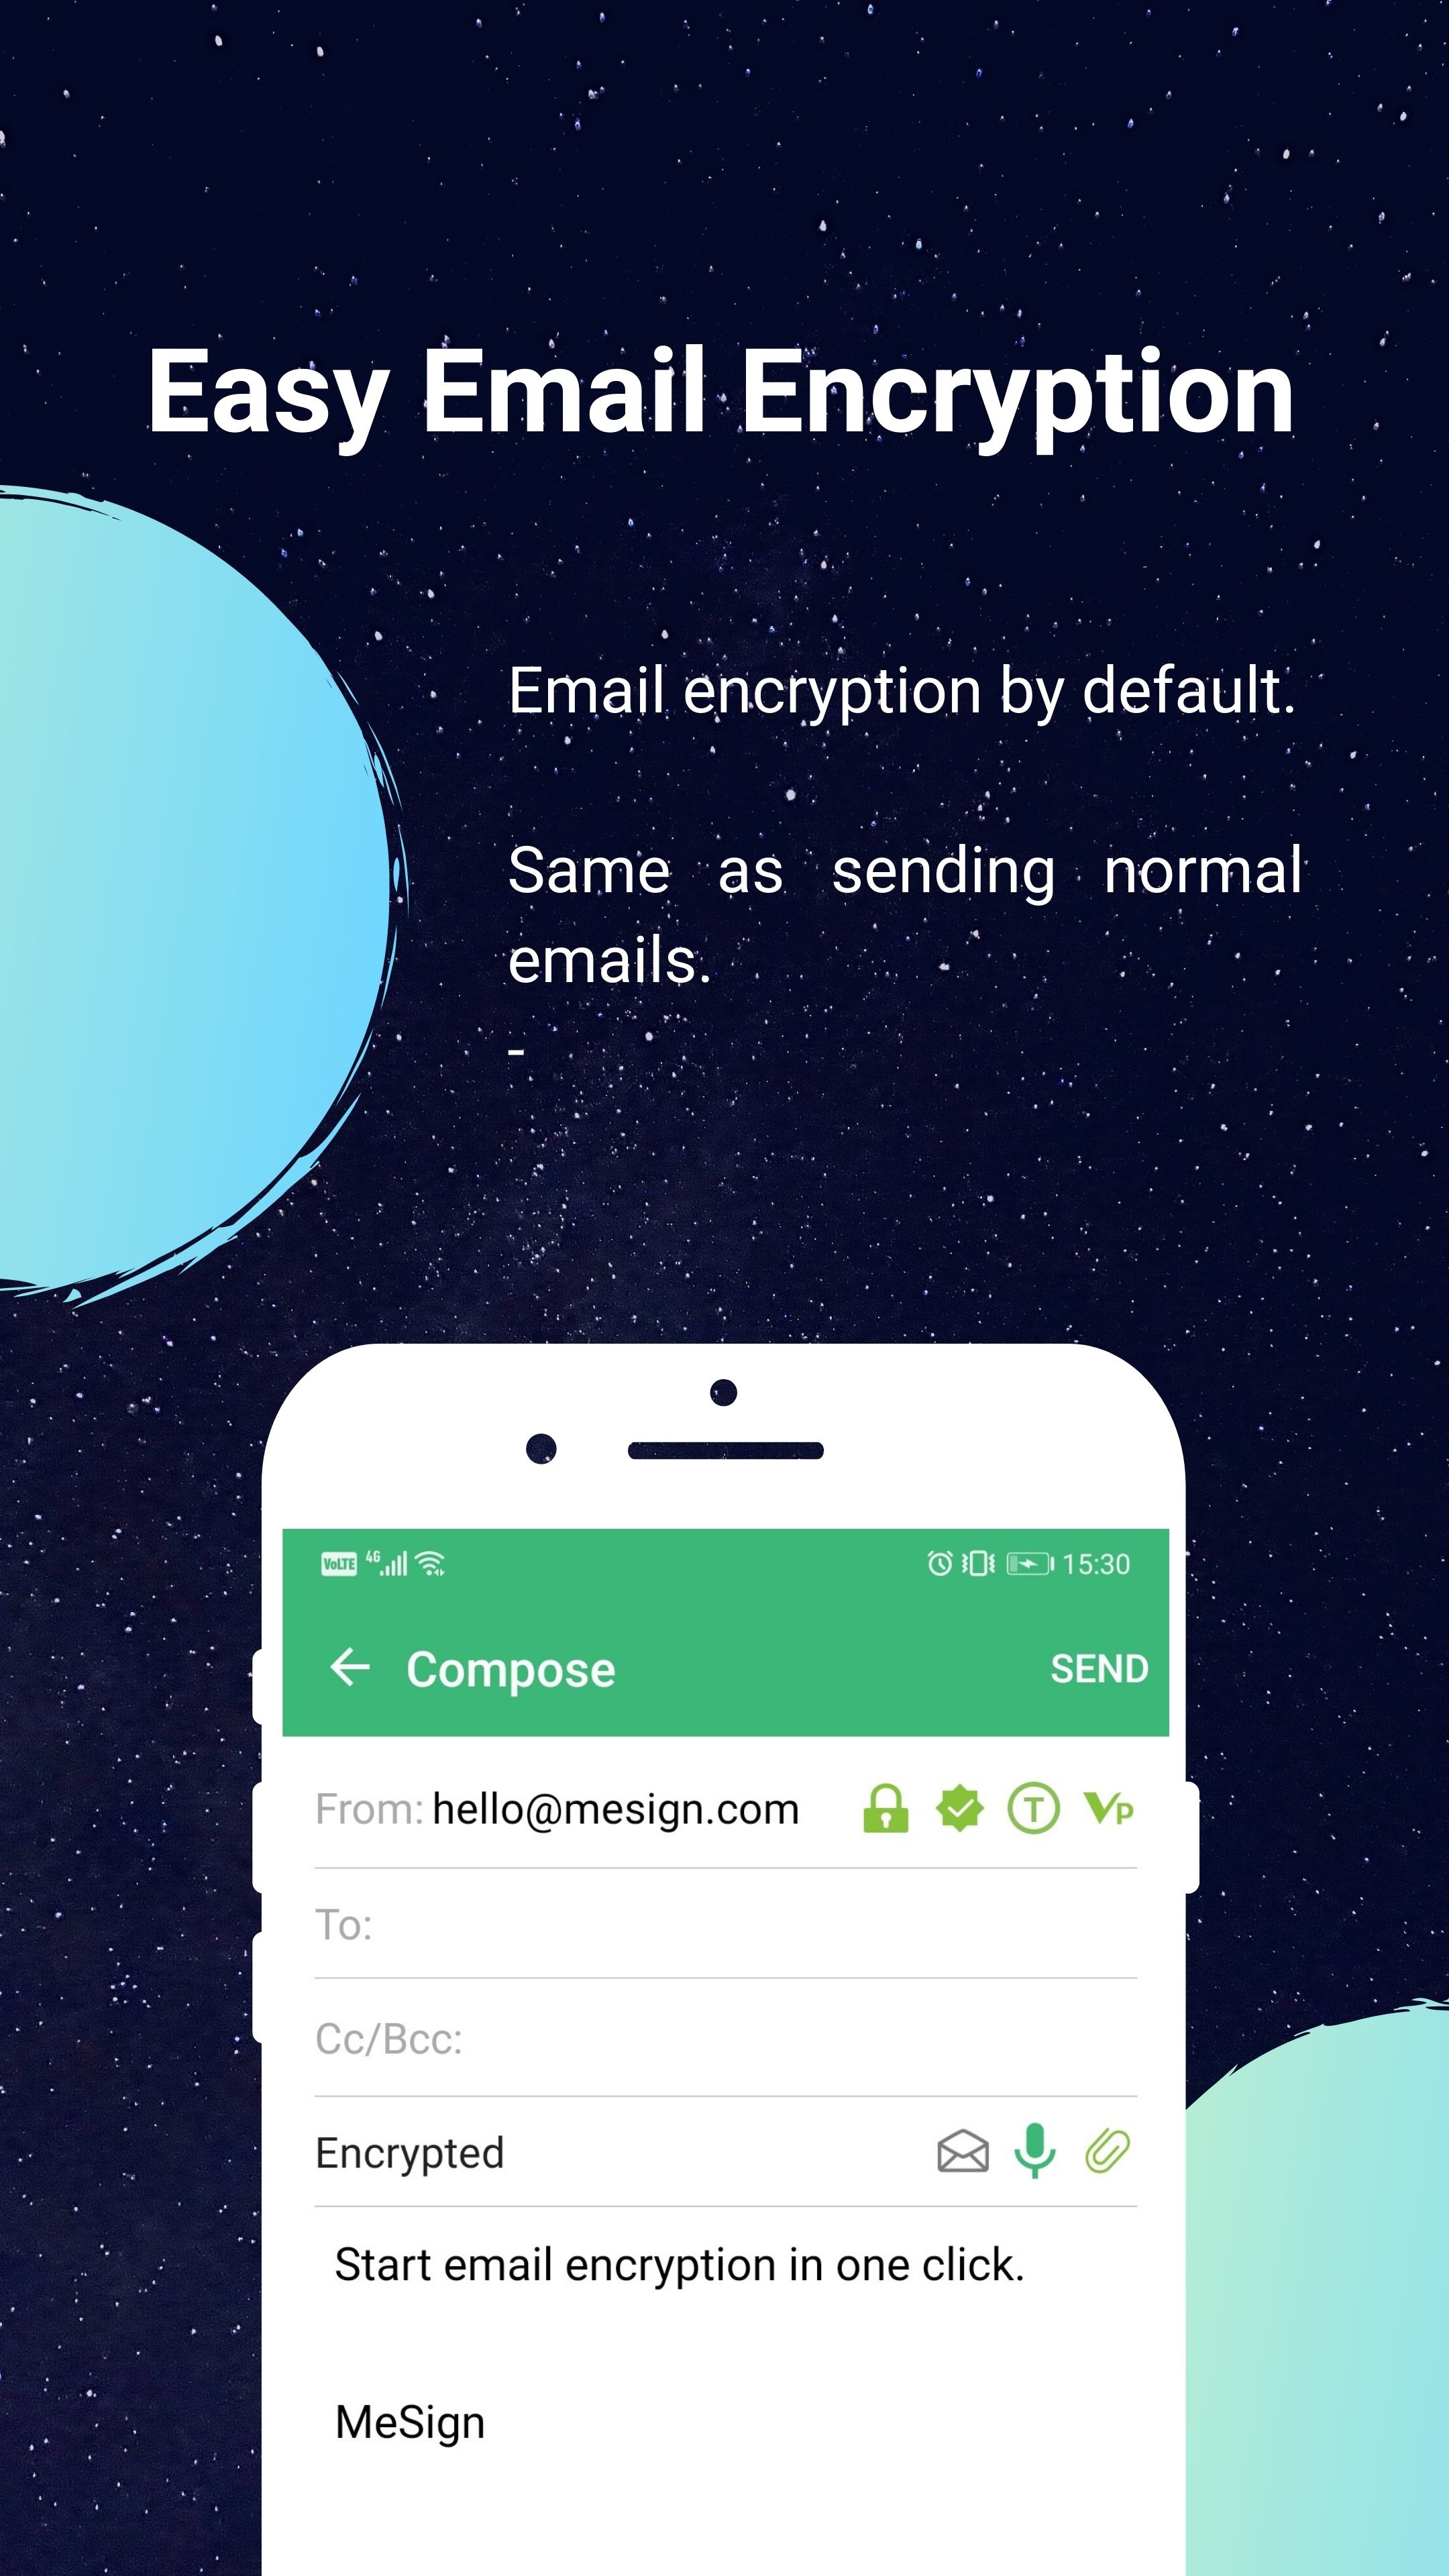 Sending encrypted emails by default as easy as sending normal emails.